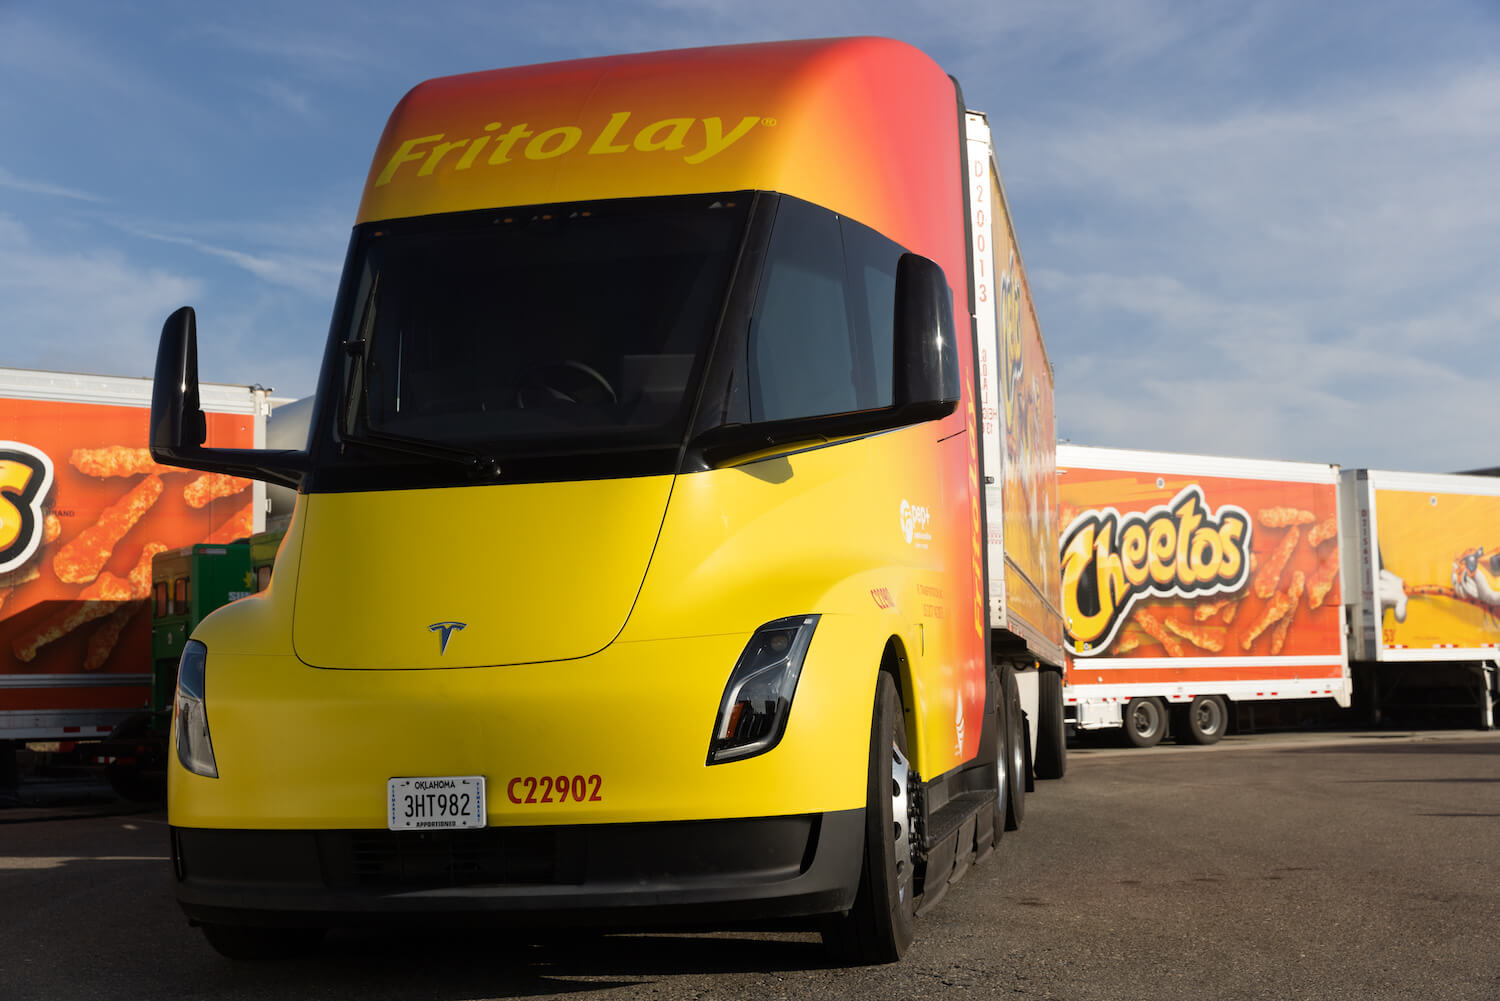 A yellow and red Tesla Semi truck operated by Frito Lay chip company, parked in front of a Cheeto trailer.